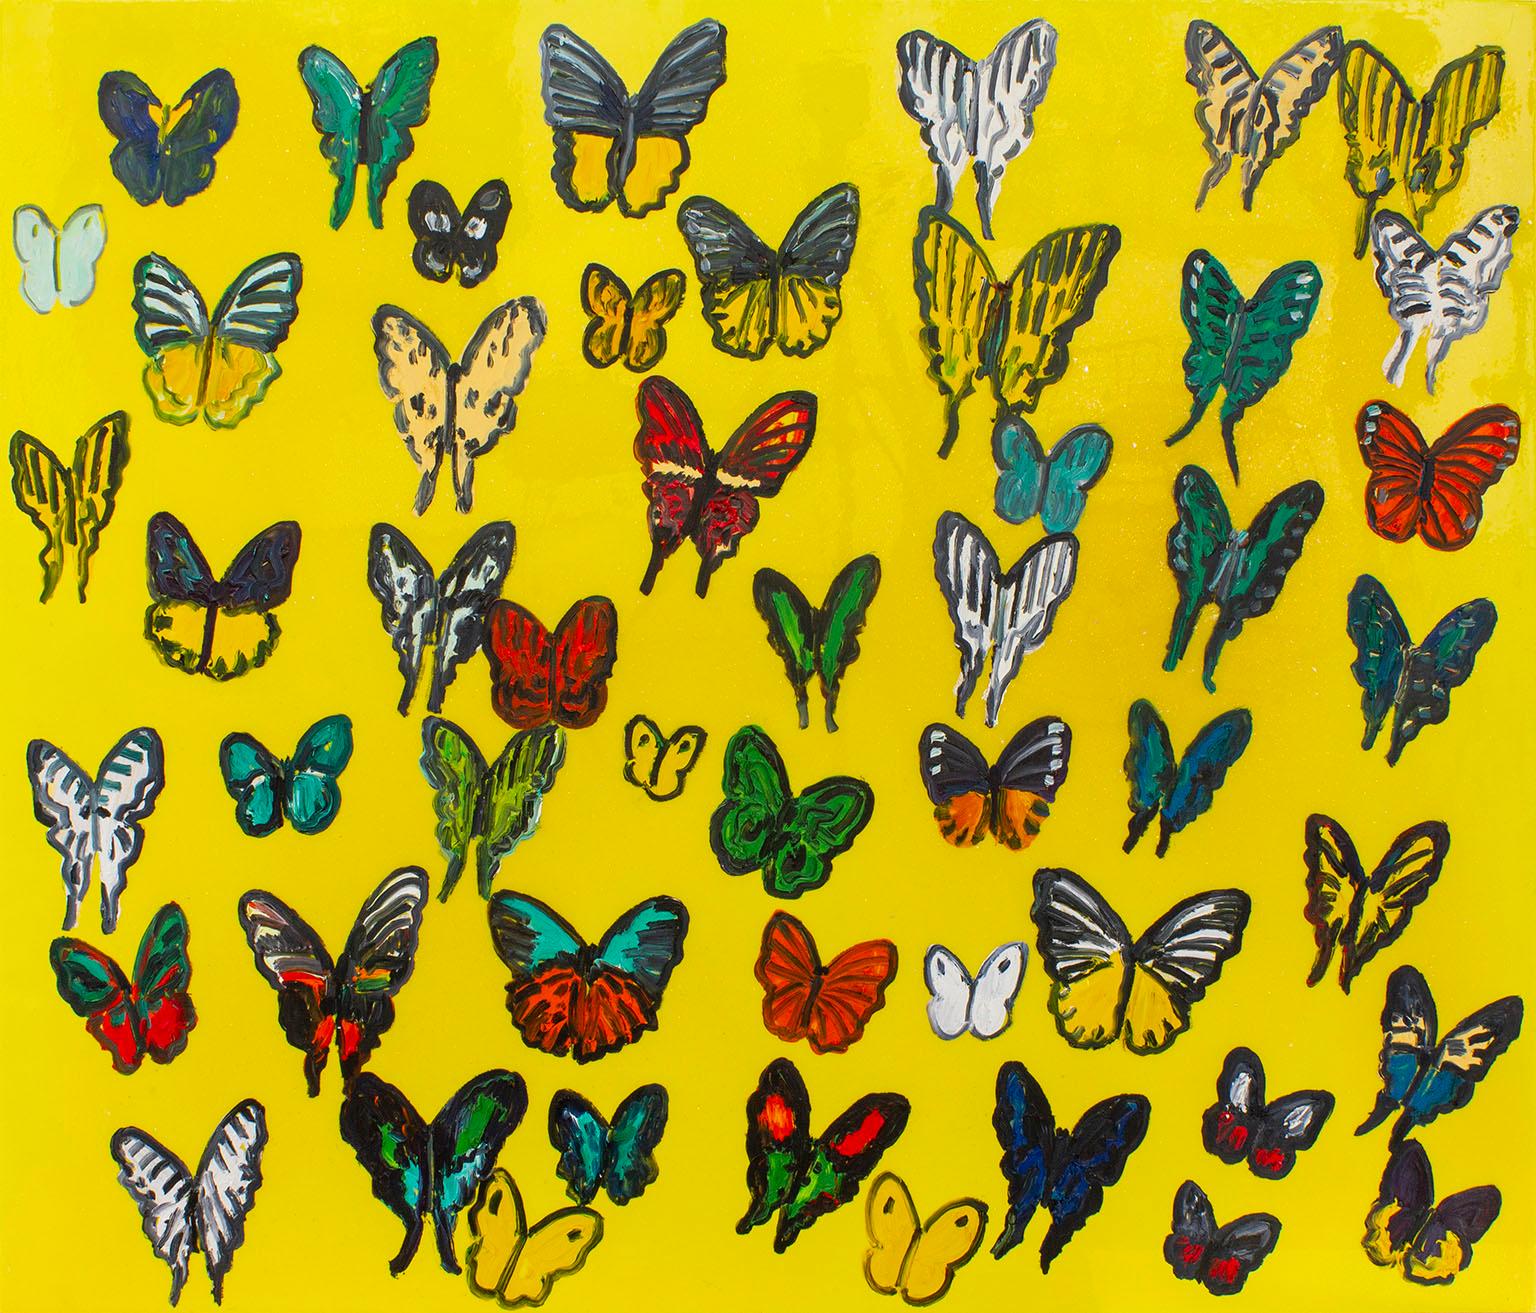 "Montana" brightly colored yellow oil, resin and acrylic on canvas painting of butterflies by artist Hunt Slonem. Signed Hunt Slonem, dated 2019 © and titled "Montana" on back. 